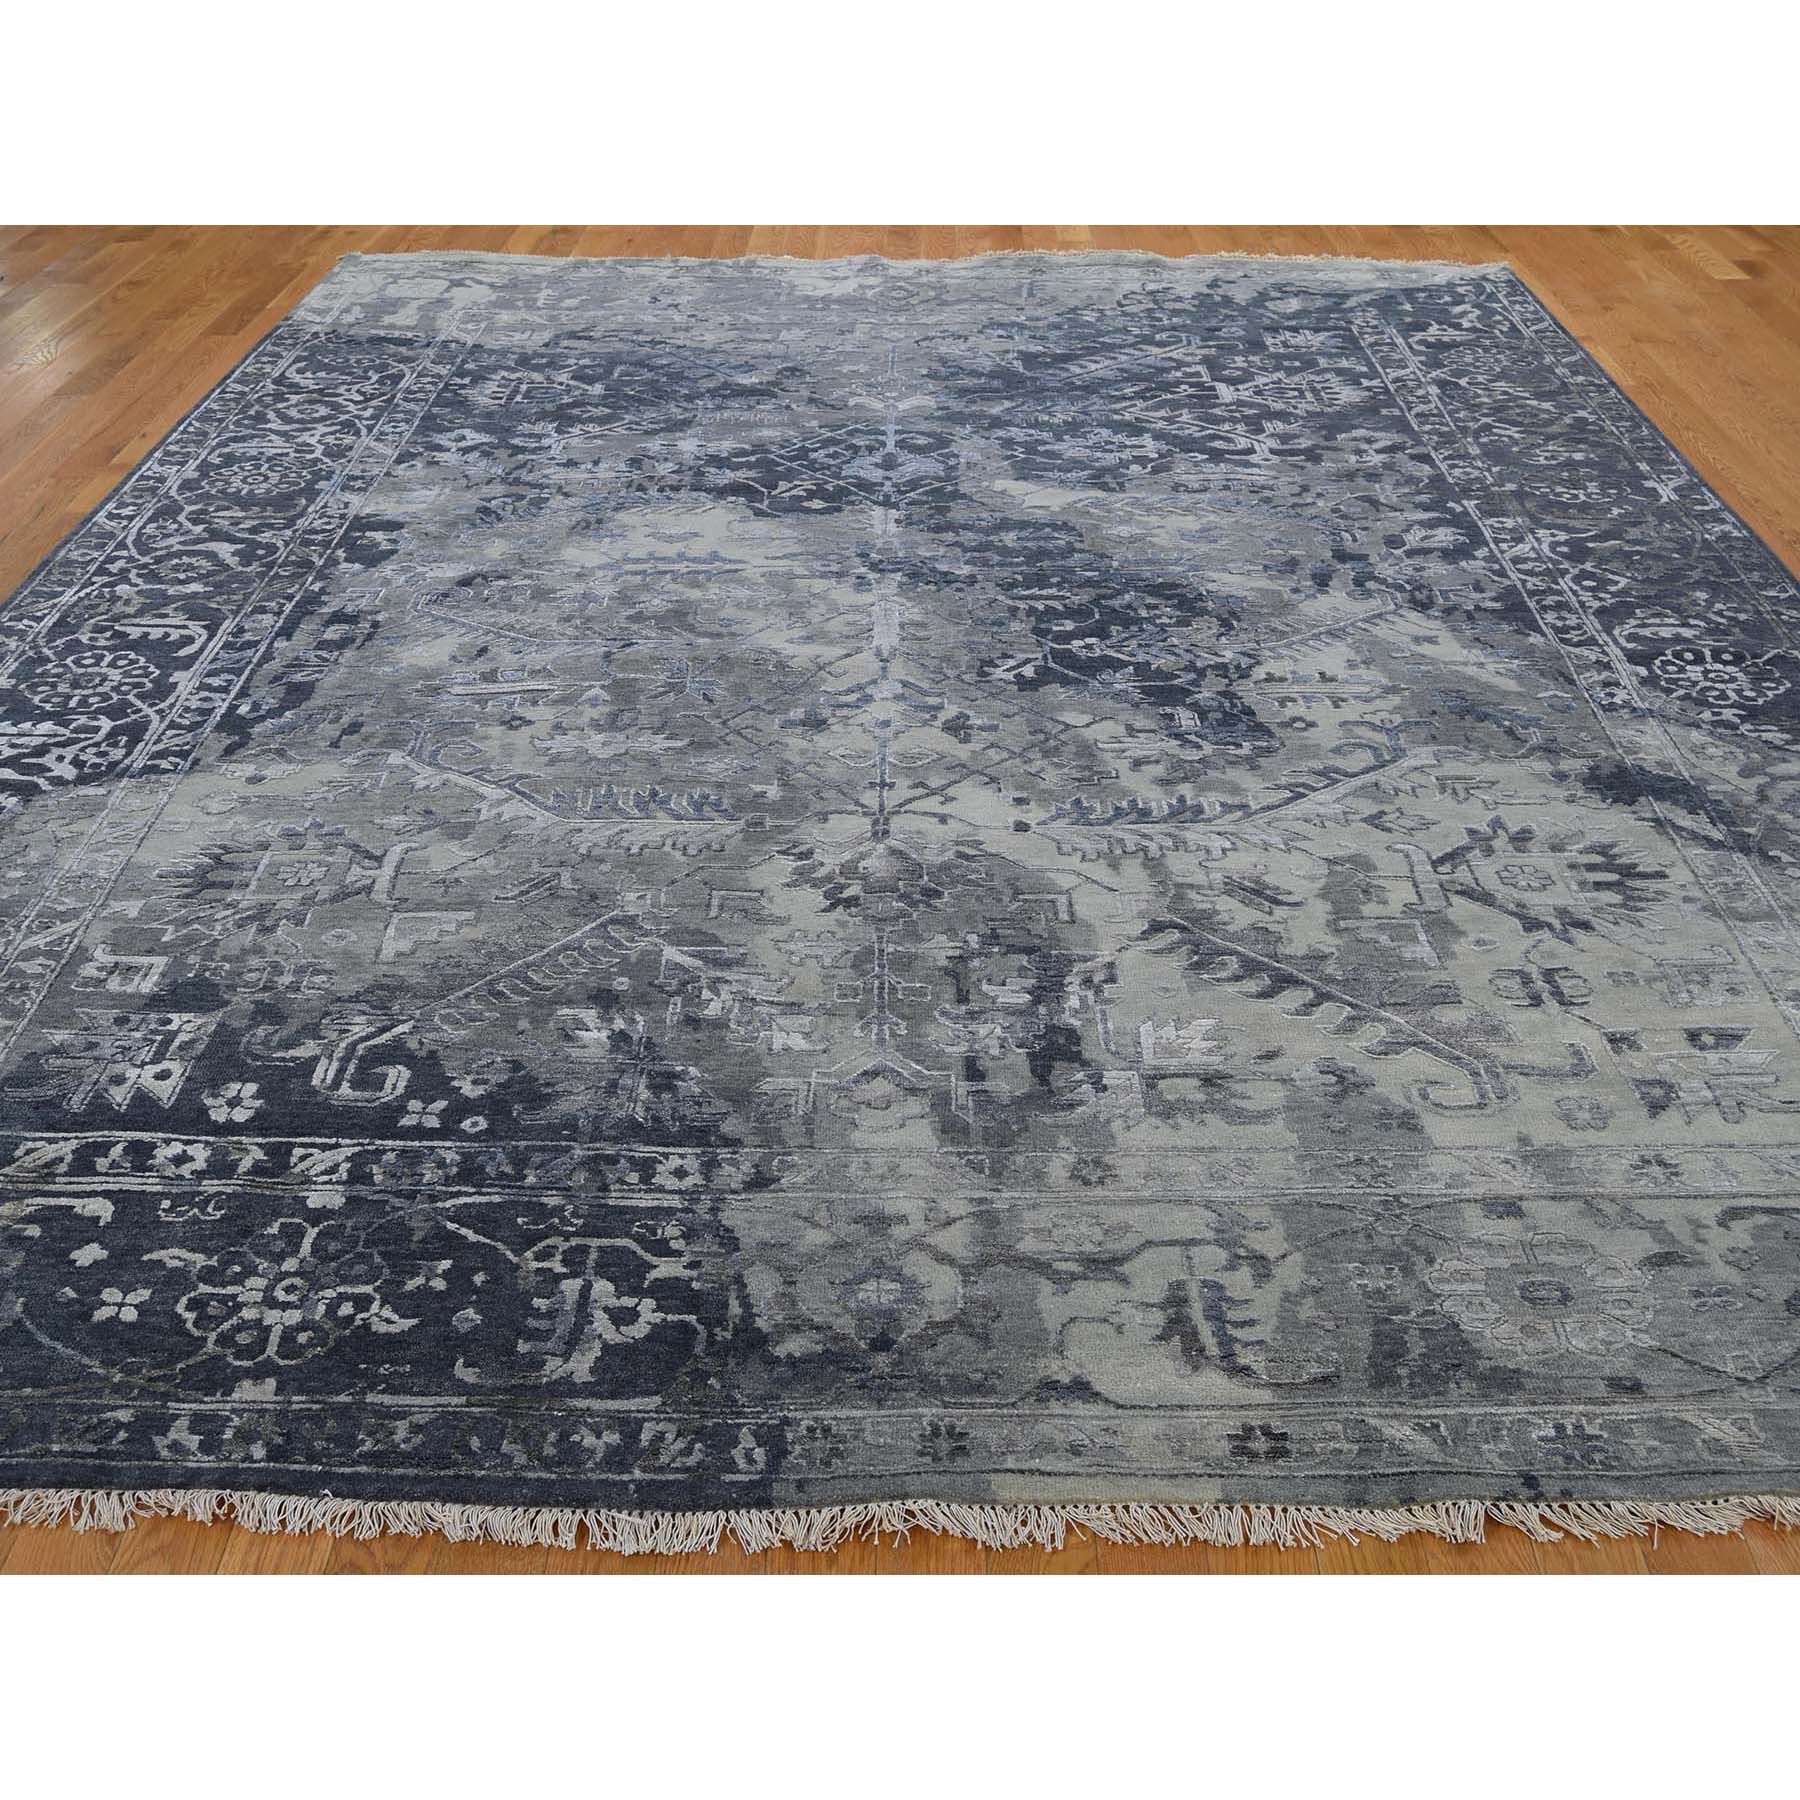 9-x12- All Over Design Broken Persian Heriz Wool And Silk Hand-Knotted Oriental Rug 